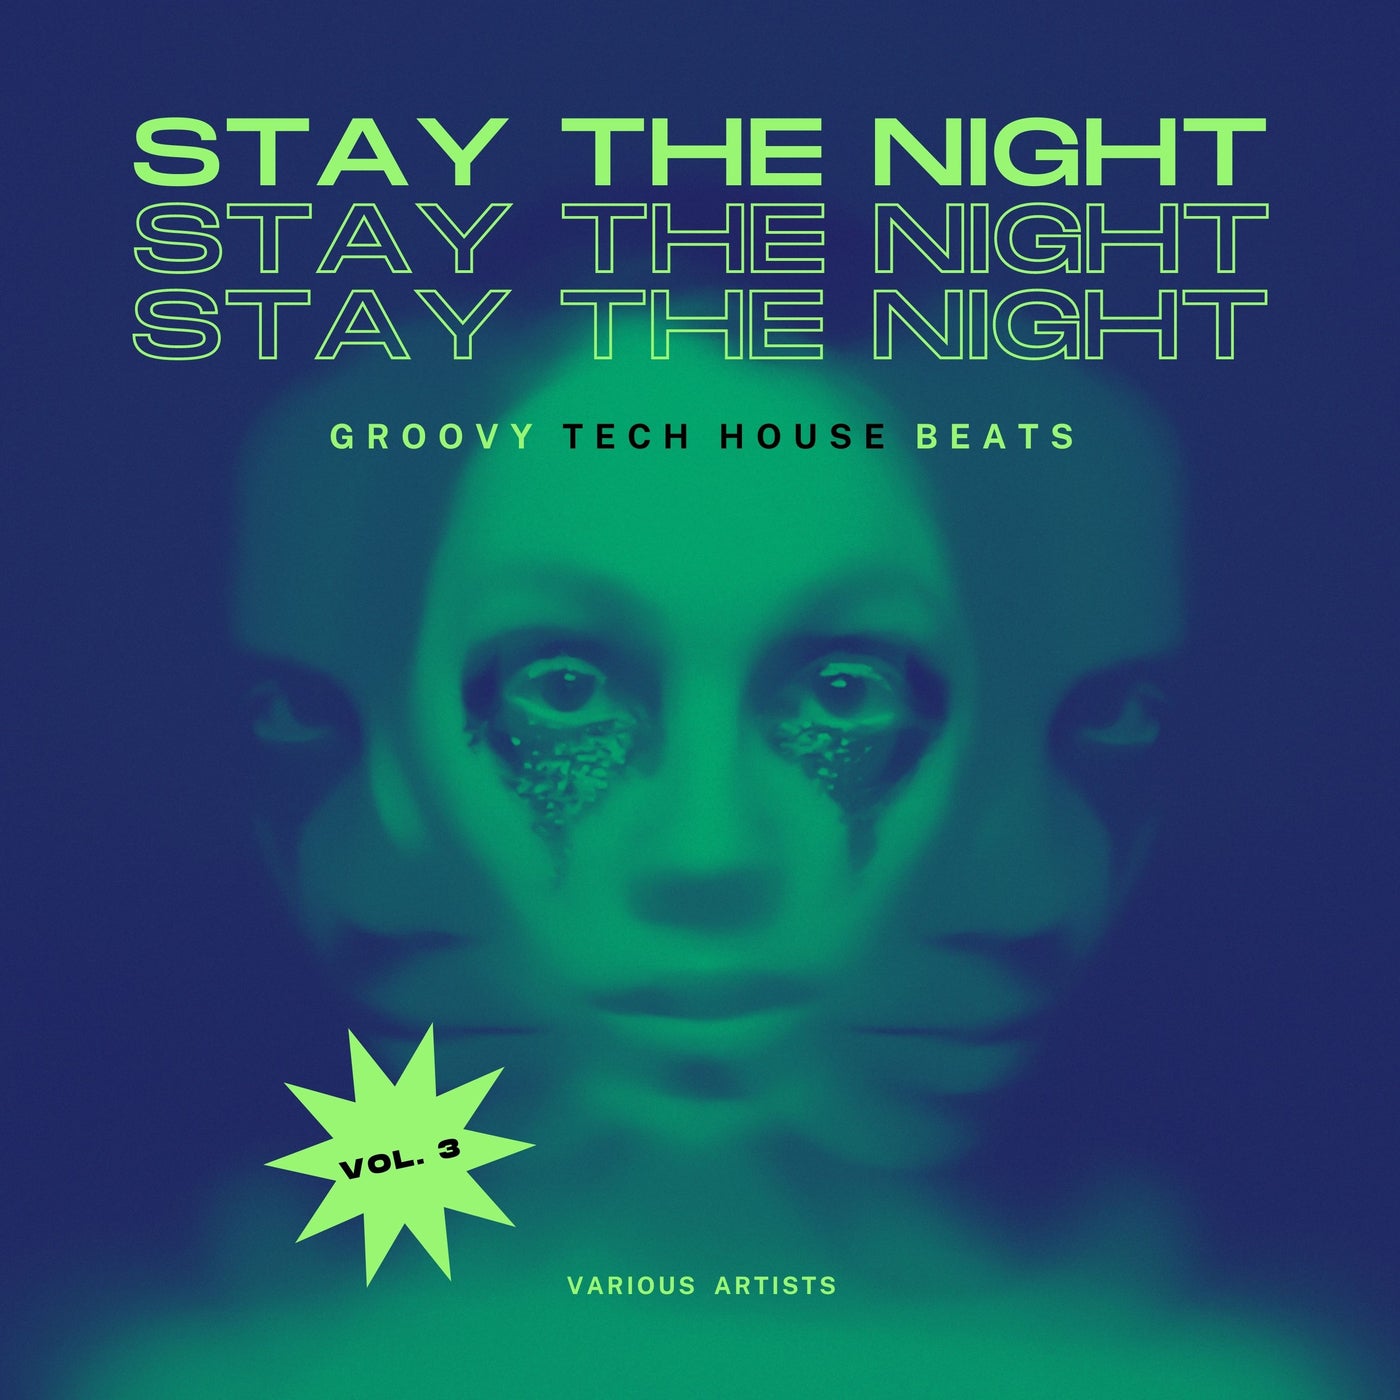 Stay The Night (Groovy Tech House Beats), Vol. 3